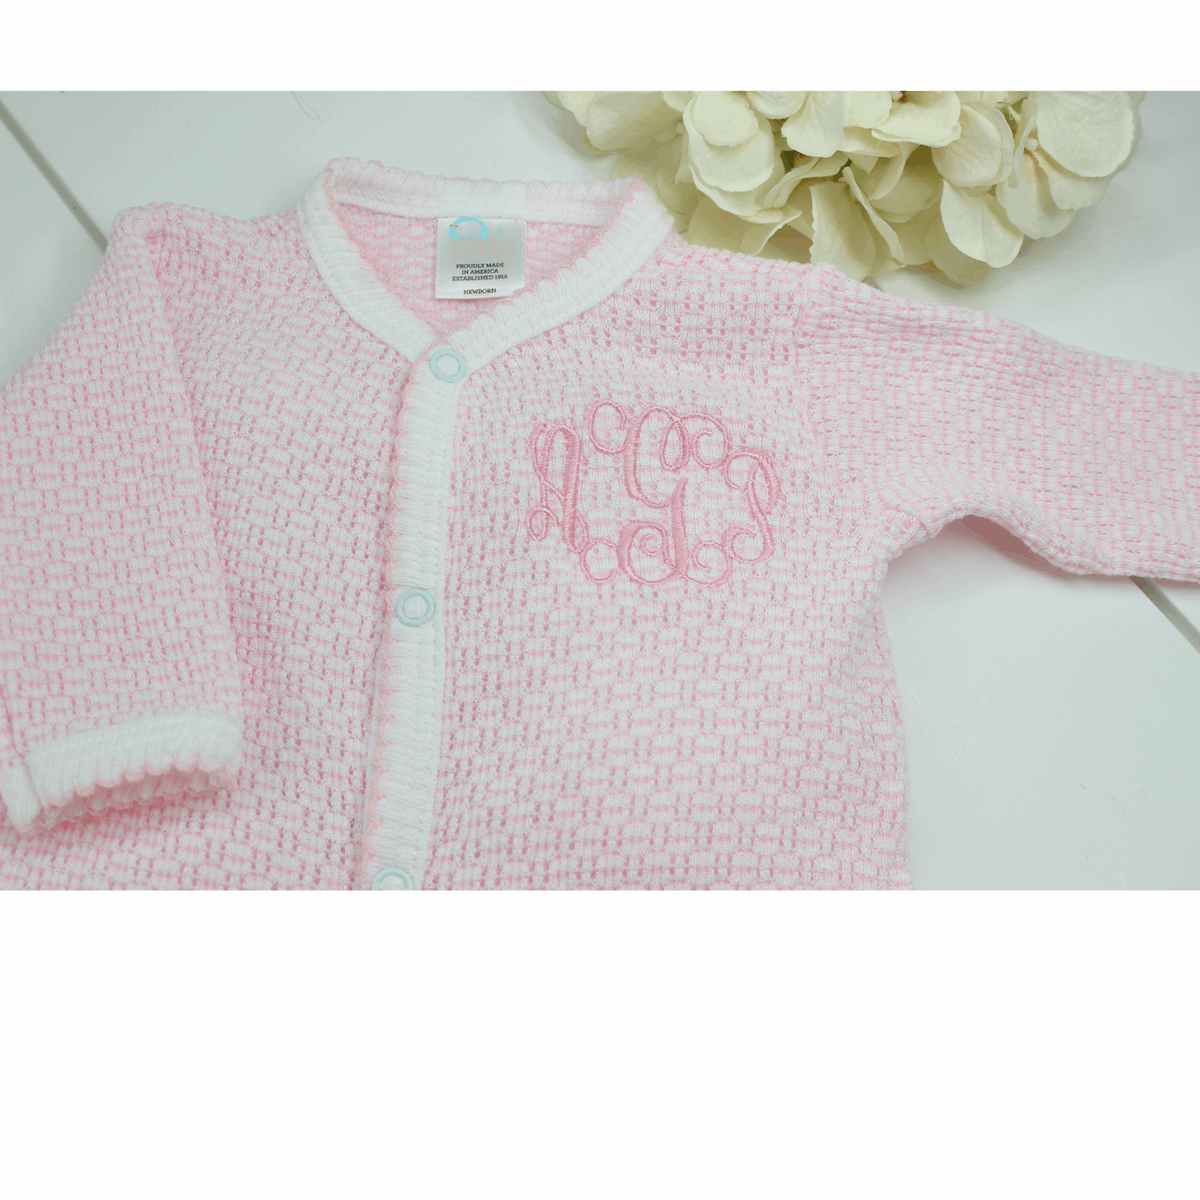 Baby Girl Coming Home Outfit Pink Footie Pajama